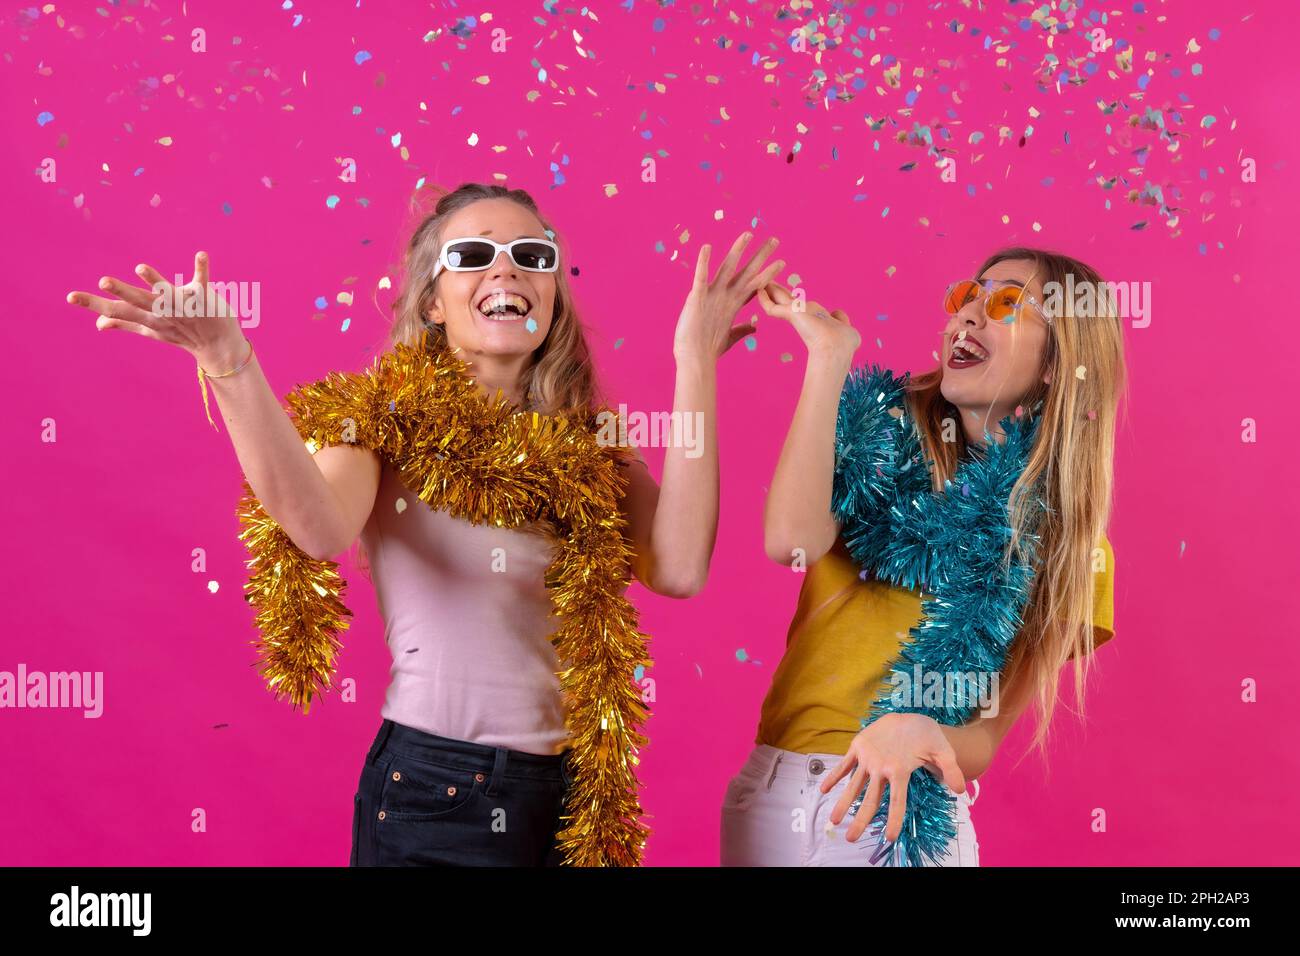 Two females wearing eyeglasses celebrating a momentous occasion by throwing confetti in the air Stock Photo